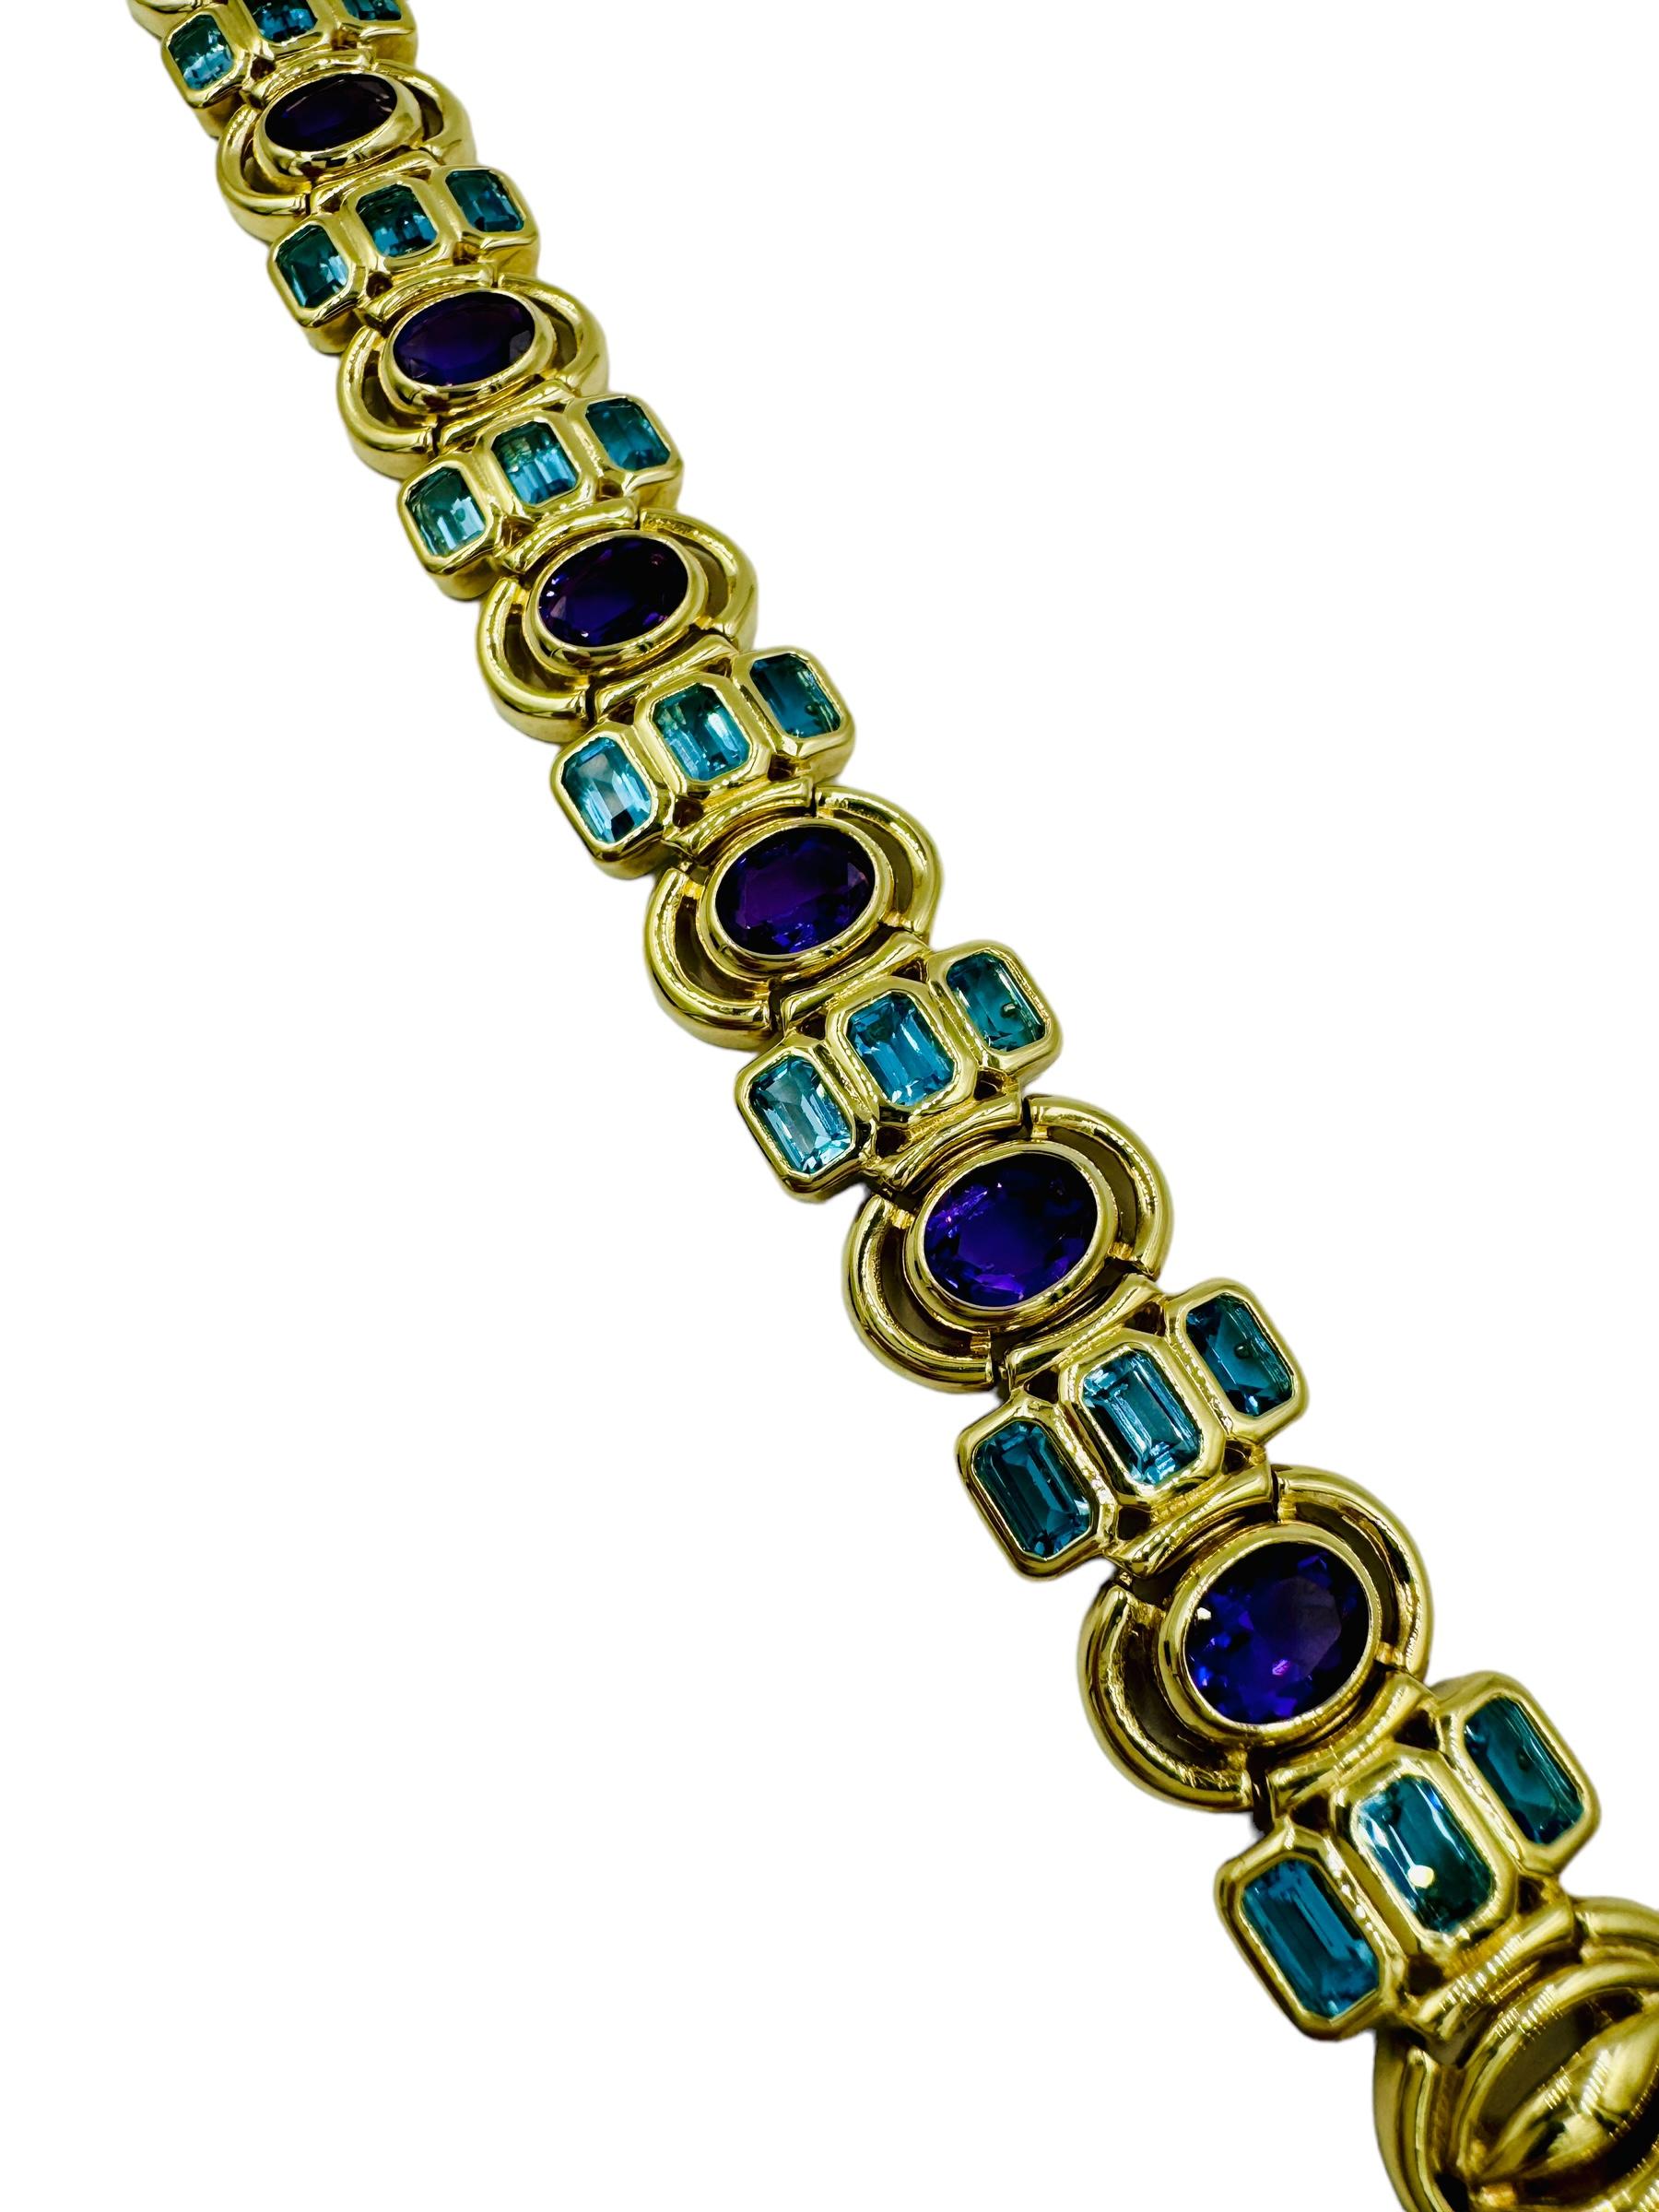 Blue Topaz Amethyst yellow gold bracelet, circa 1990s.

The Blue Topaz Amethyst Yellow Gold Bracelet is a stunning piece of jewelry that exudes elegance and sophistication. Crafted with care and precision, this bracelet features a beautiful